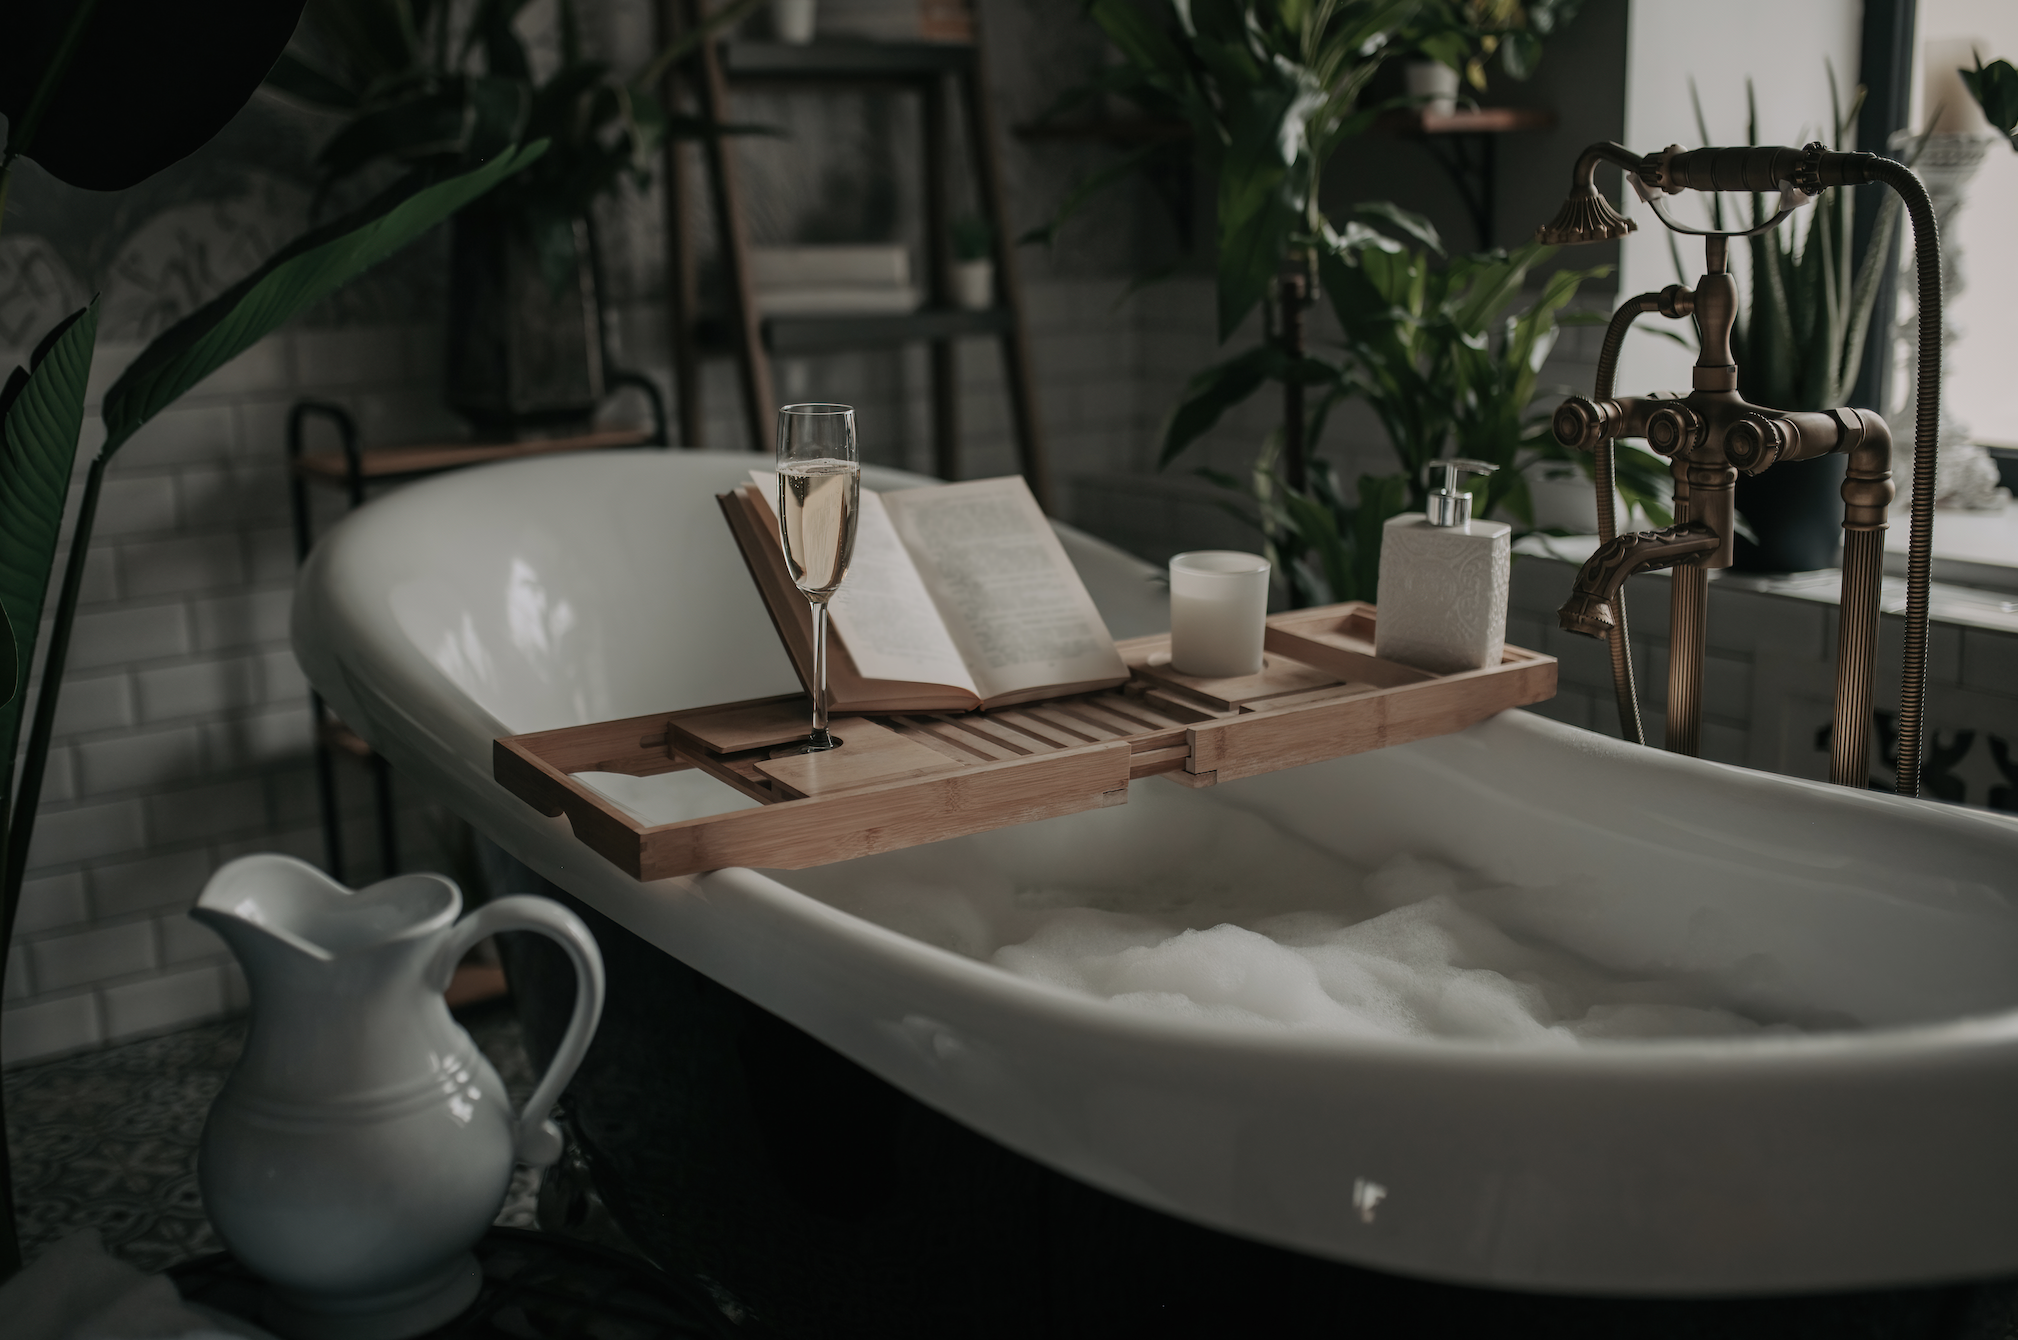 11 of the Best Bathtub Trays, According to Reviews